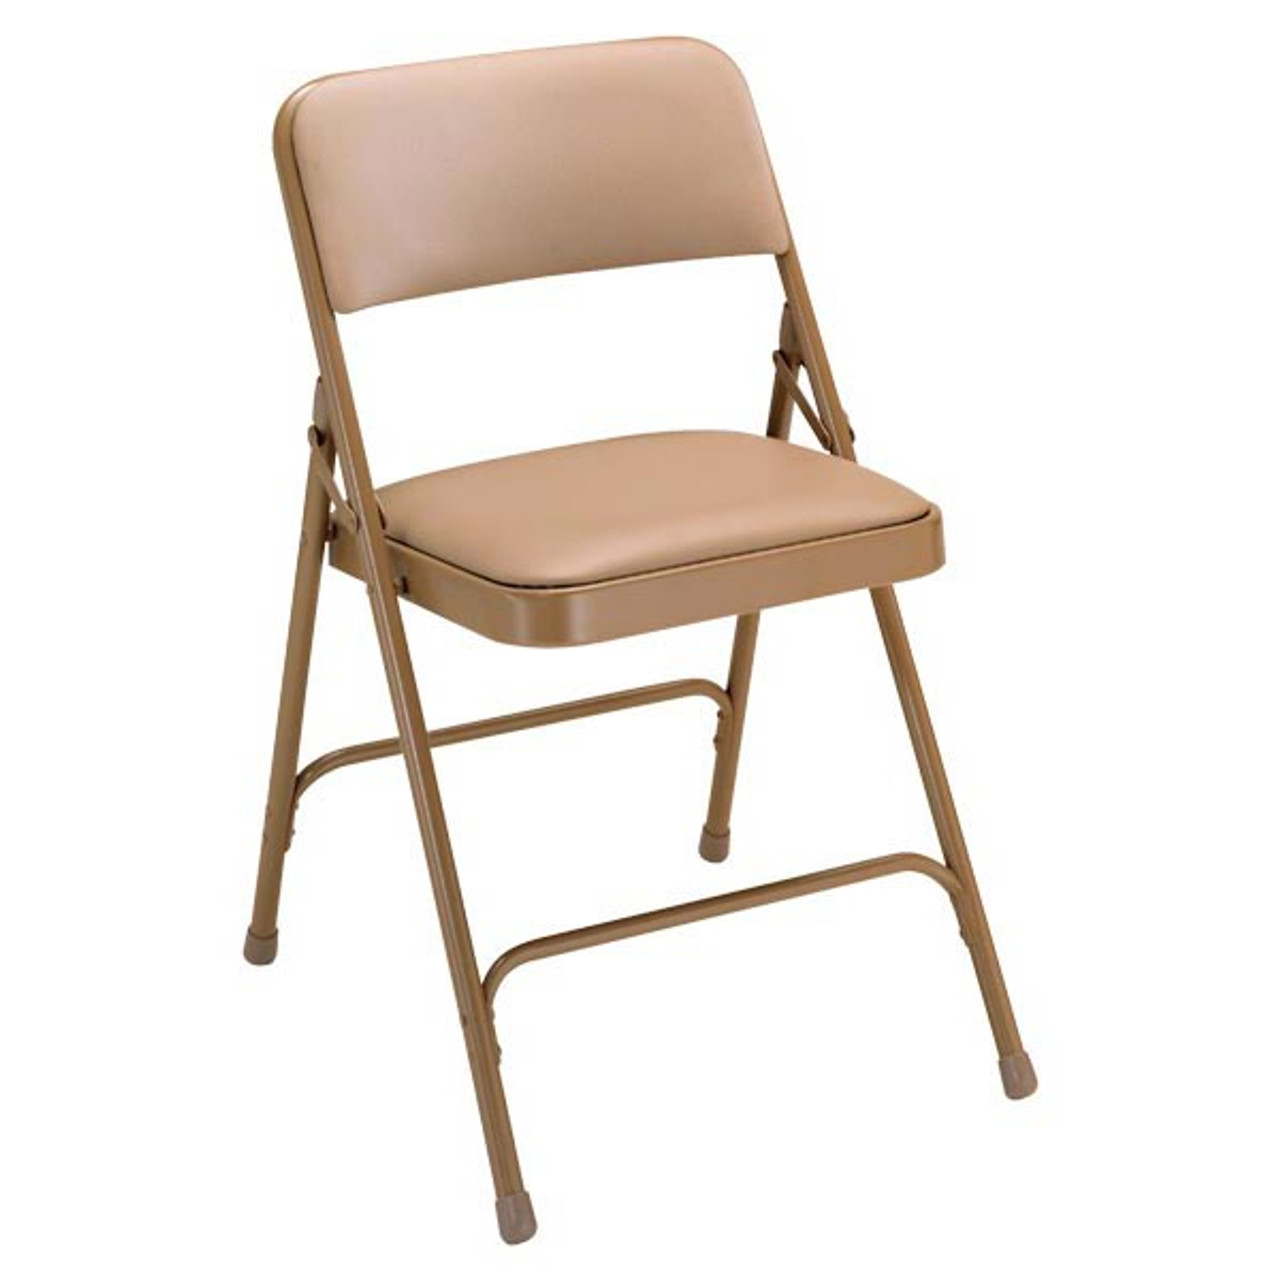 Premium 2 Thick Vinyl Padded Folding Chair By National Public Seating,  3200 Series 